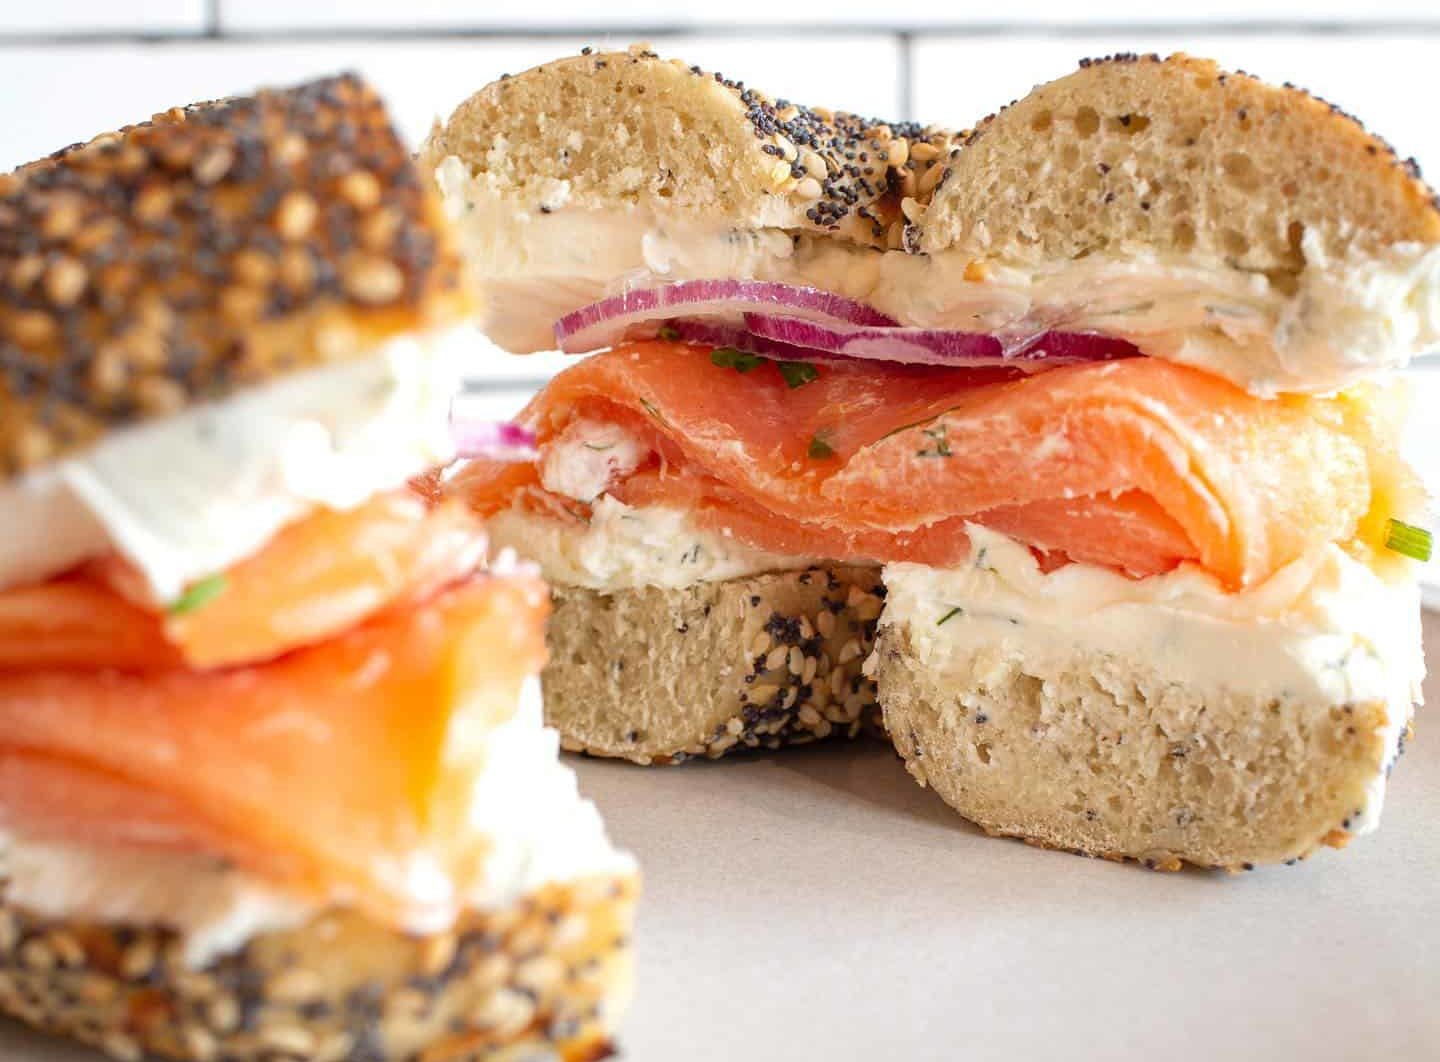 Lox bagel from Orwashers